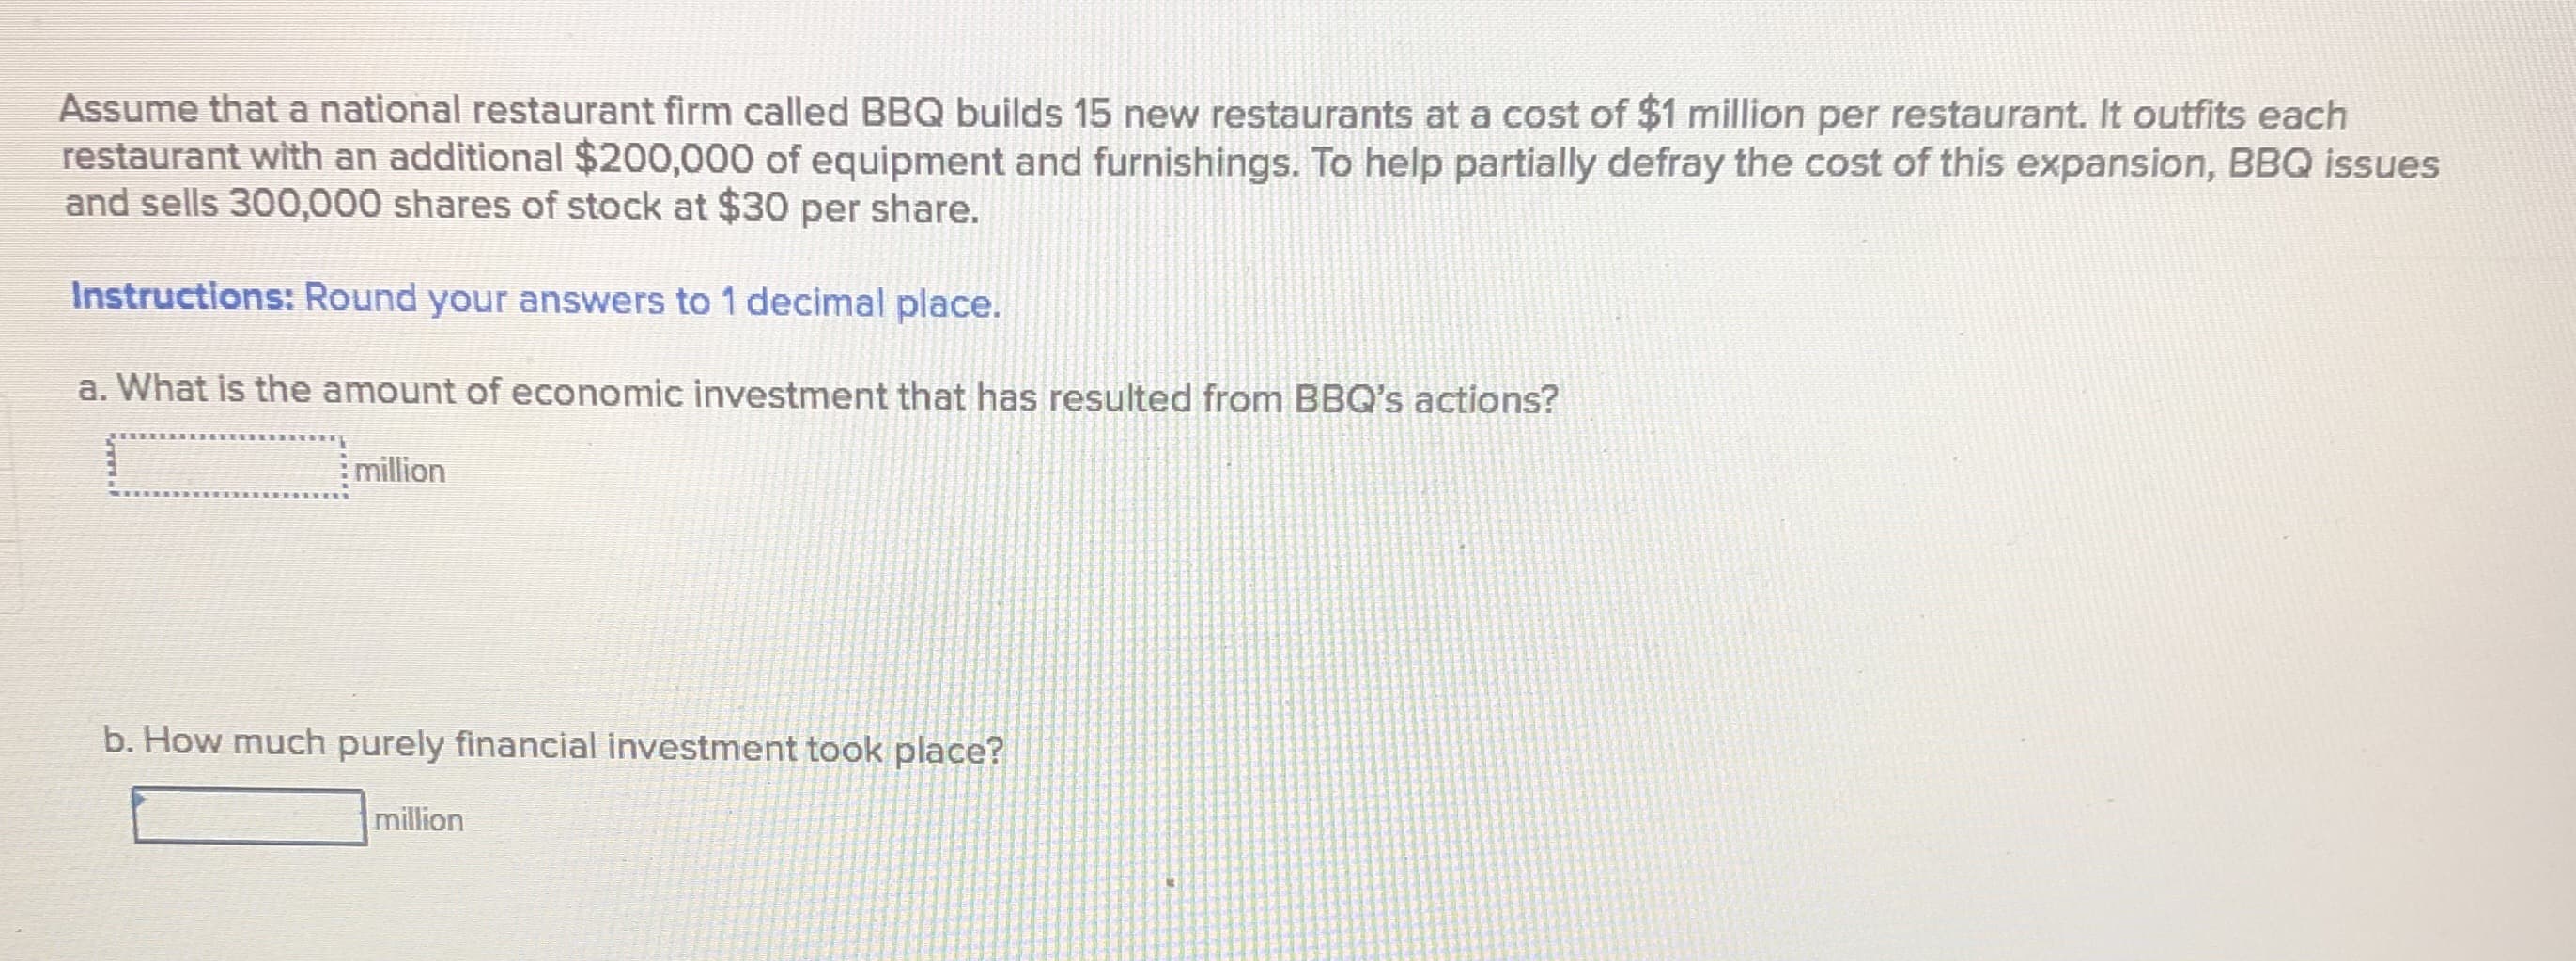 Assume that a national restaurant firm called BBQ builds 15 new restaurants at a cost of $1 million per restaurant. It outfits each
restaurant with an additional $200,000 of equipment and furnishings. To help partially defray the cost of this expansion, BBQ issues
and sells 300,000 shares of stock at $30 per share.
Instructions: Round your answers to 1 decimal place.
a. What is the amount of economic investment that has resulted from BBQ's actions?
million
b. How much purely financial investment took place?
million
